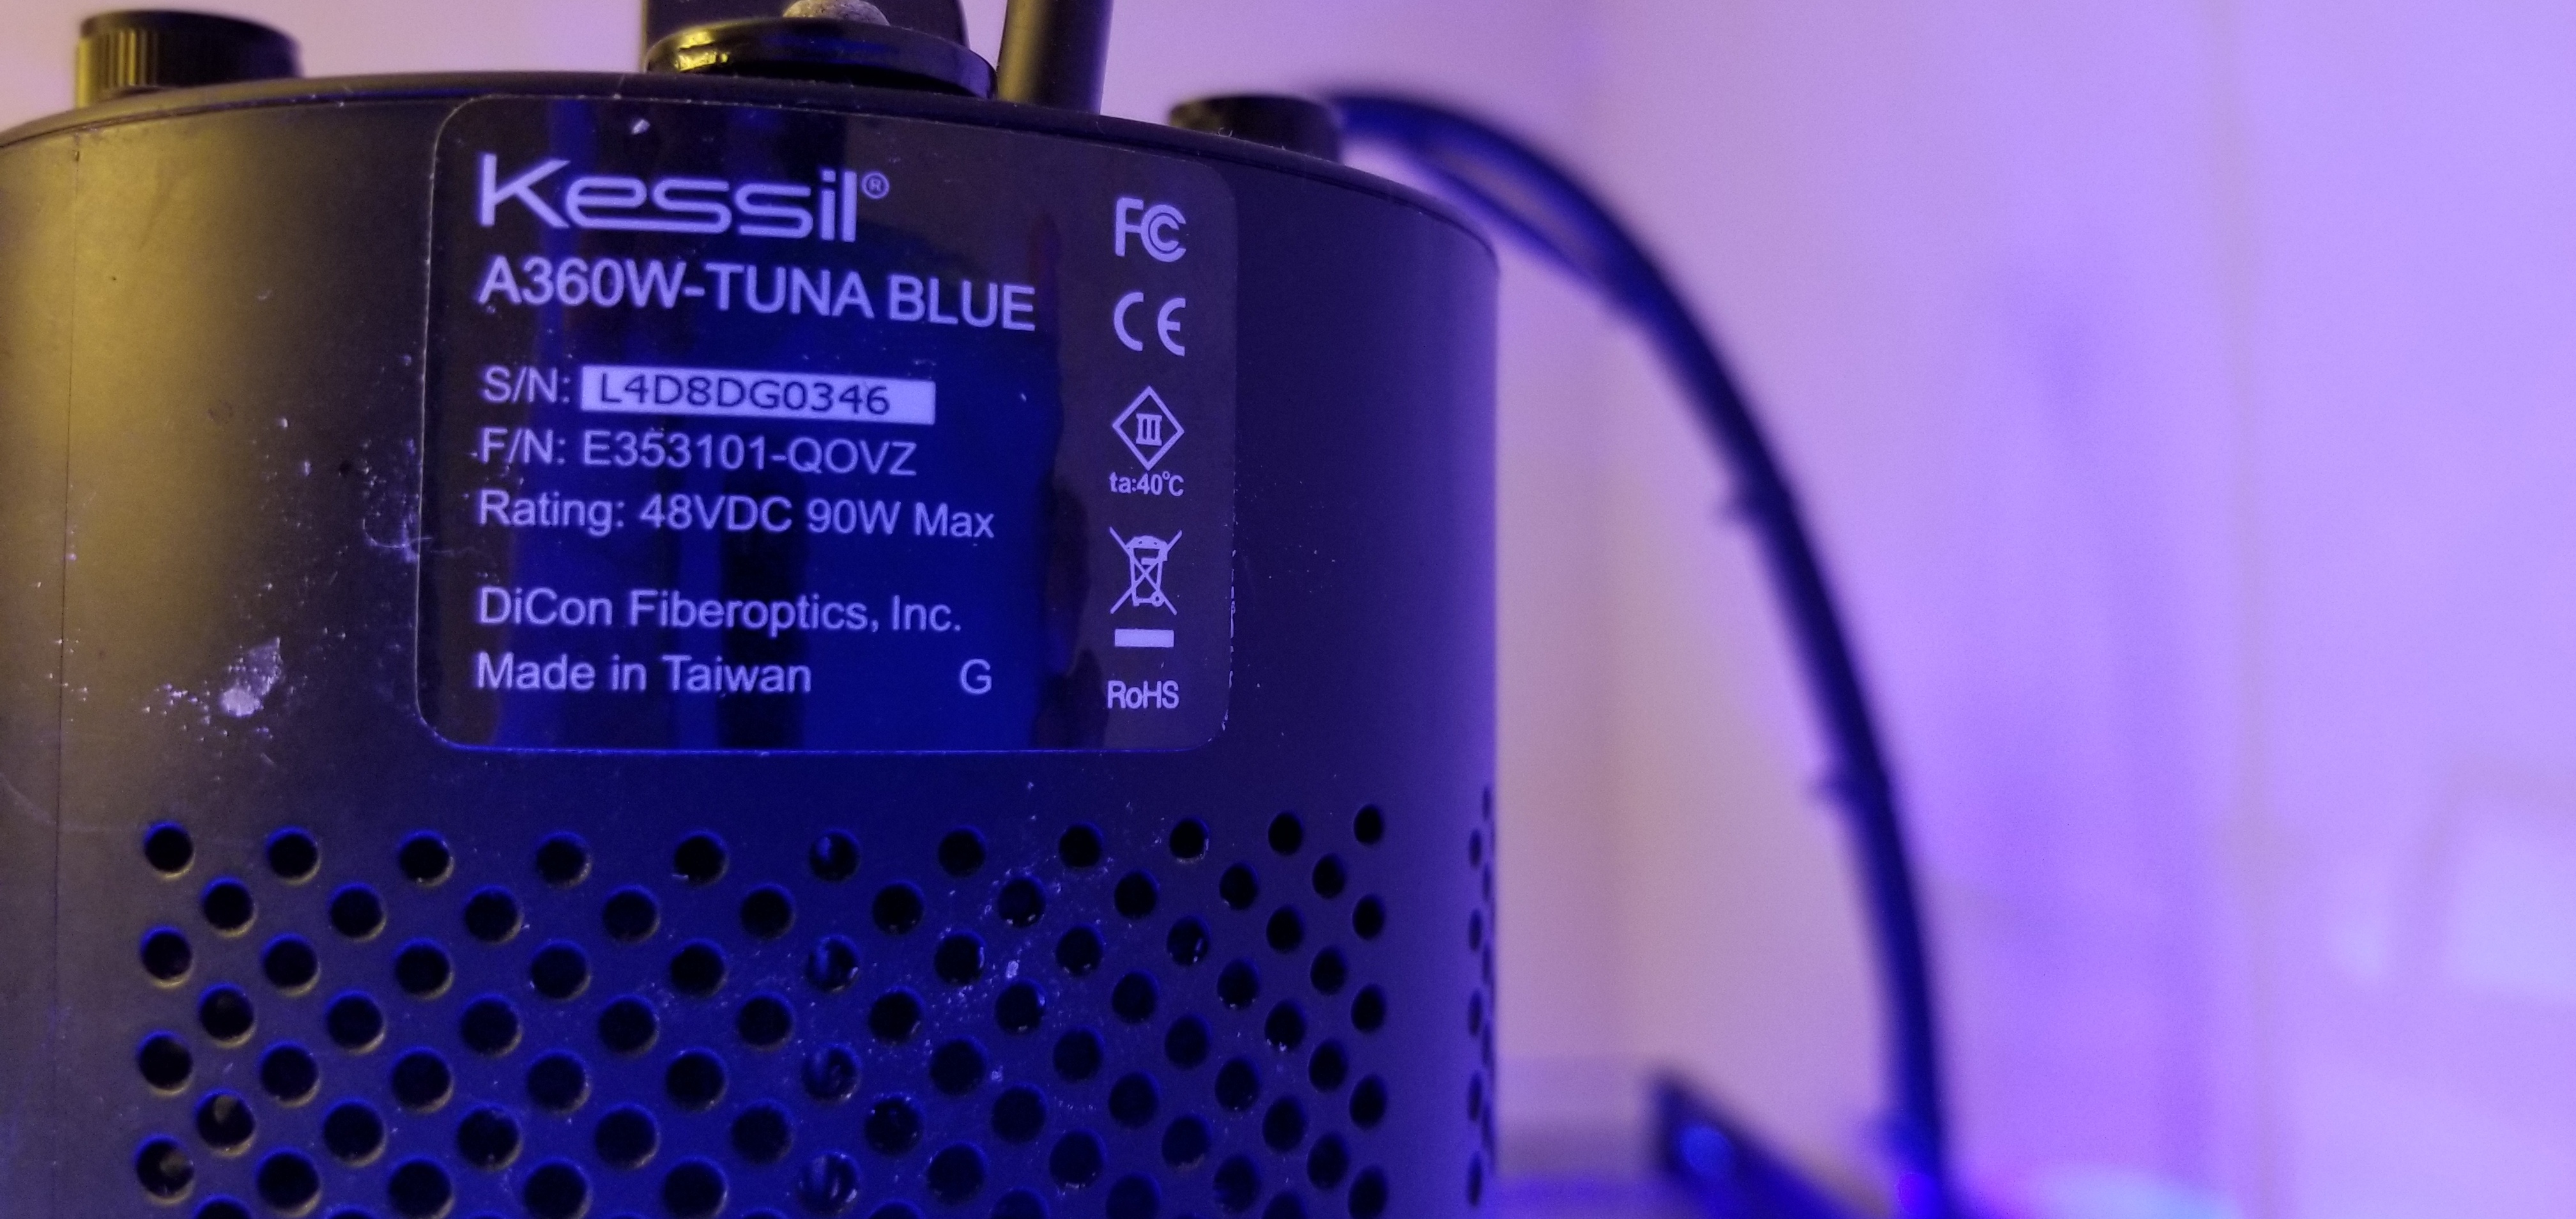 Kessil A360W Tuna Blue for Sale – $160 – Dry Goods For Sale/Trade